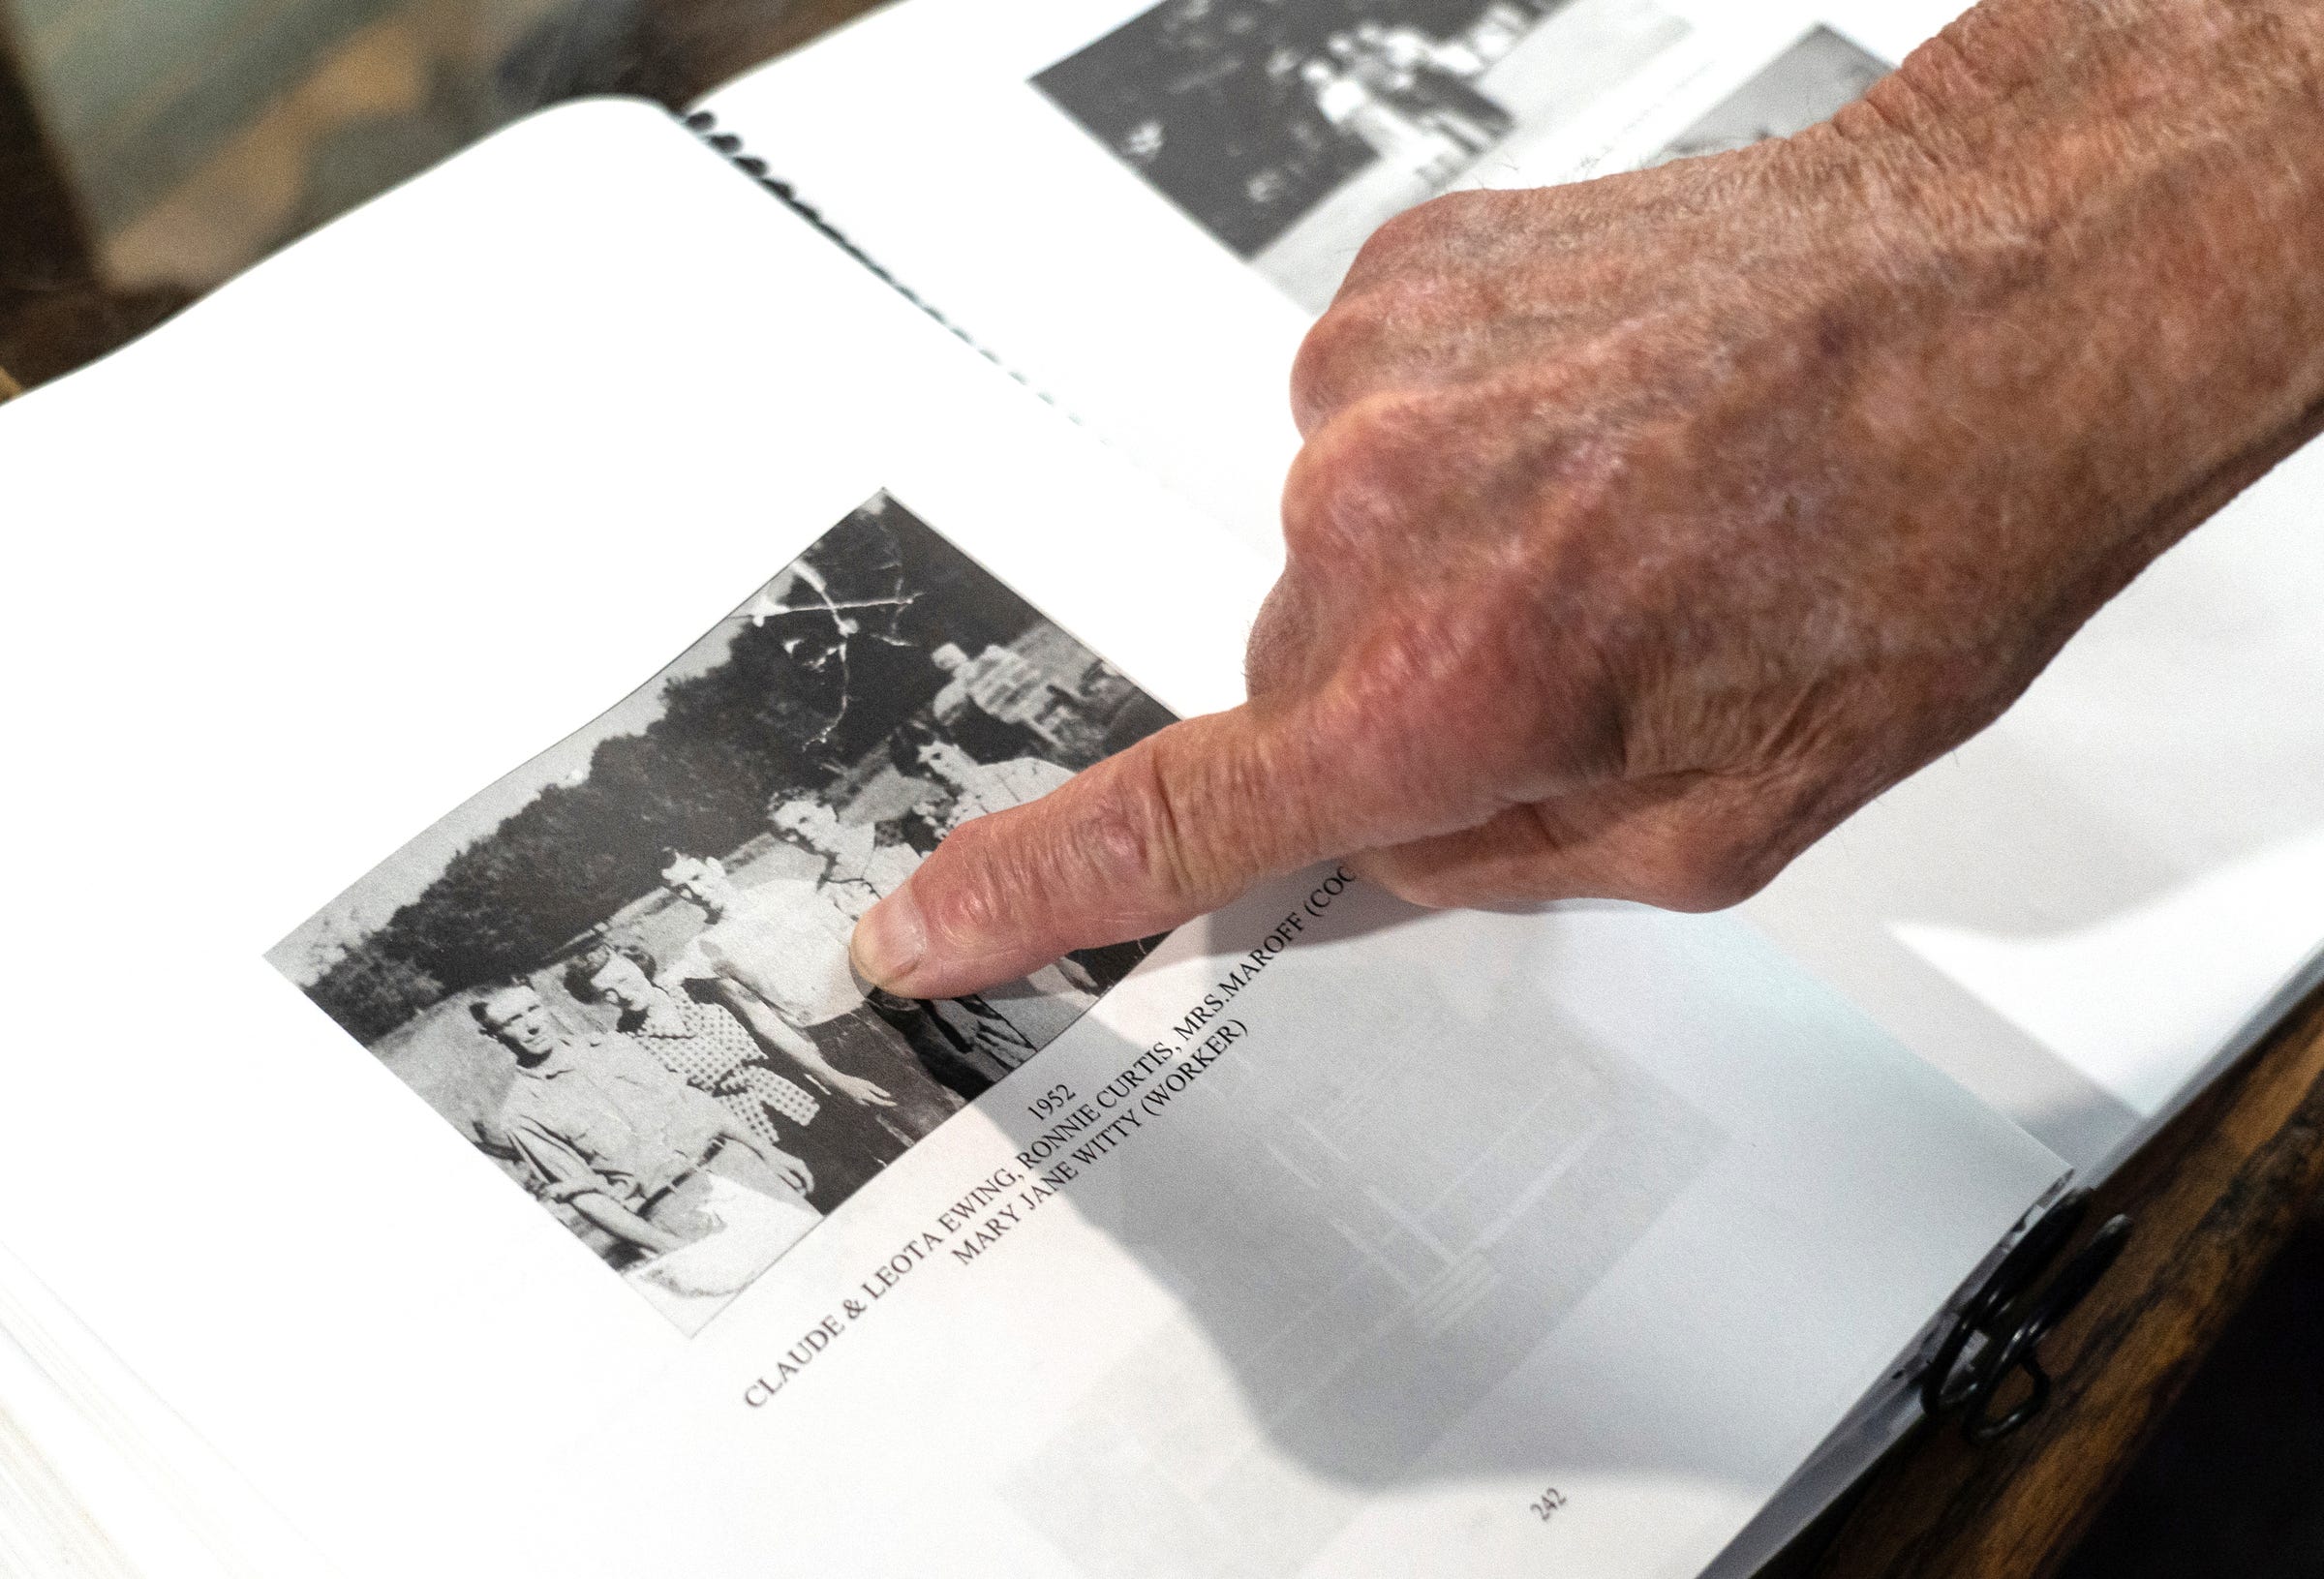 Mailman Ron Curtis, 86, of Wetmore points to a photo of himself in 1952 found in a local history book on display at the Midway General Store in Wetmore on Wednesday, July 27, 2022.